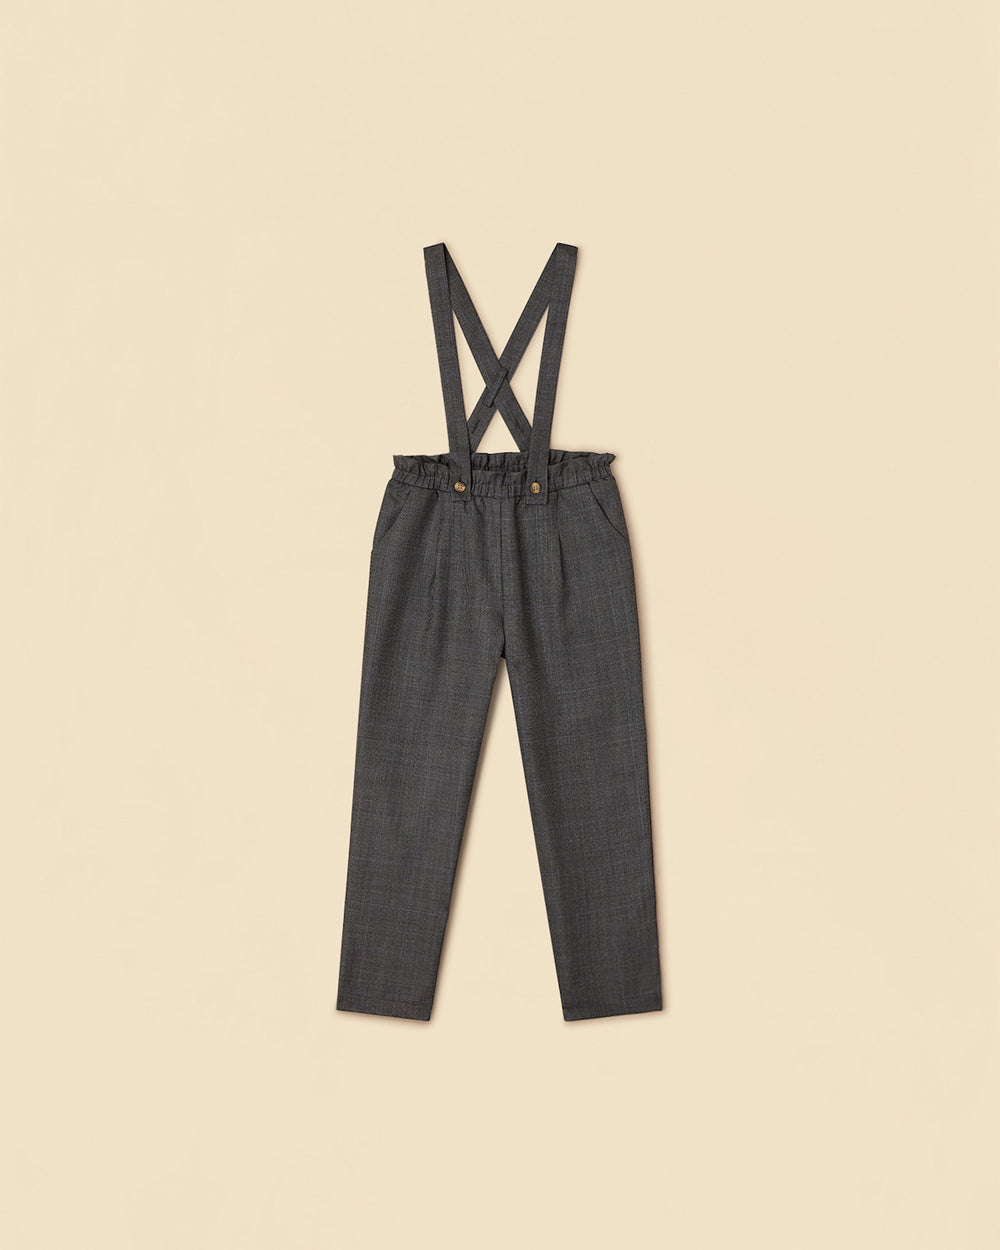 Merino Wool Suspender Pants | Kids Clothing | The Sunday Collective